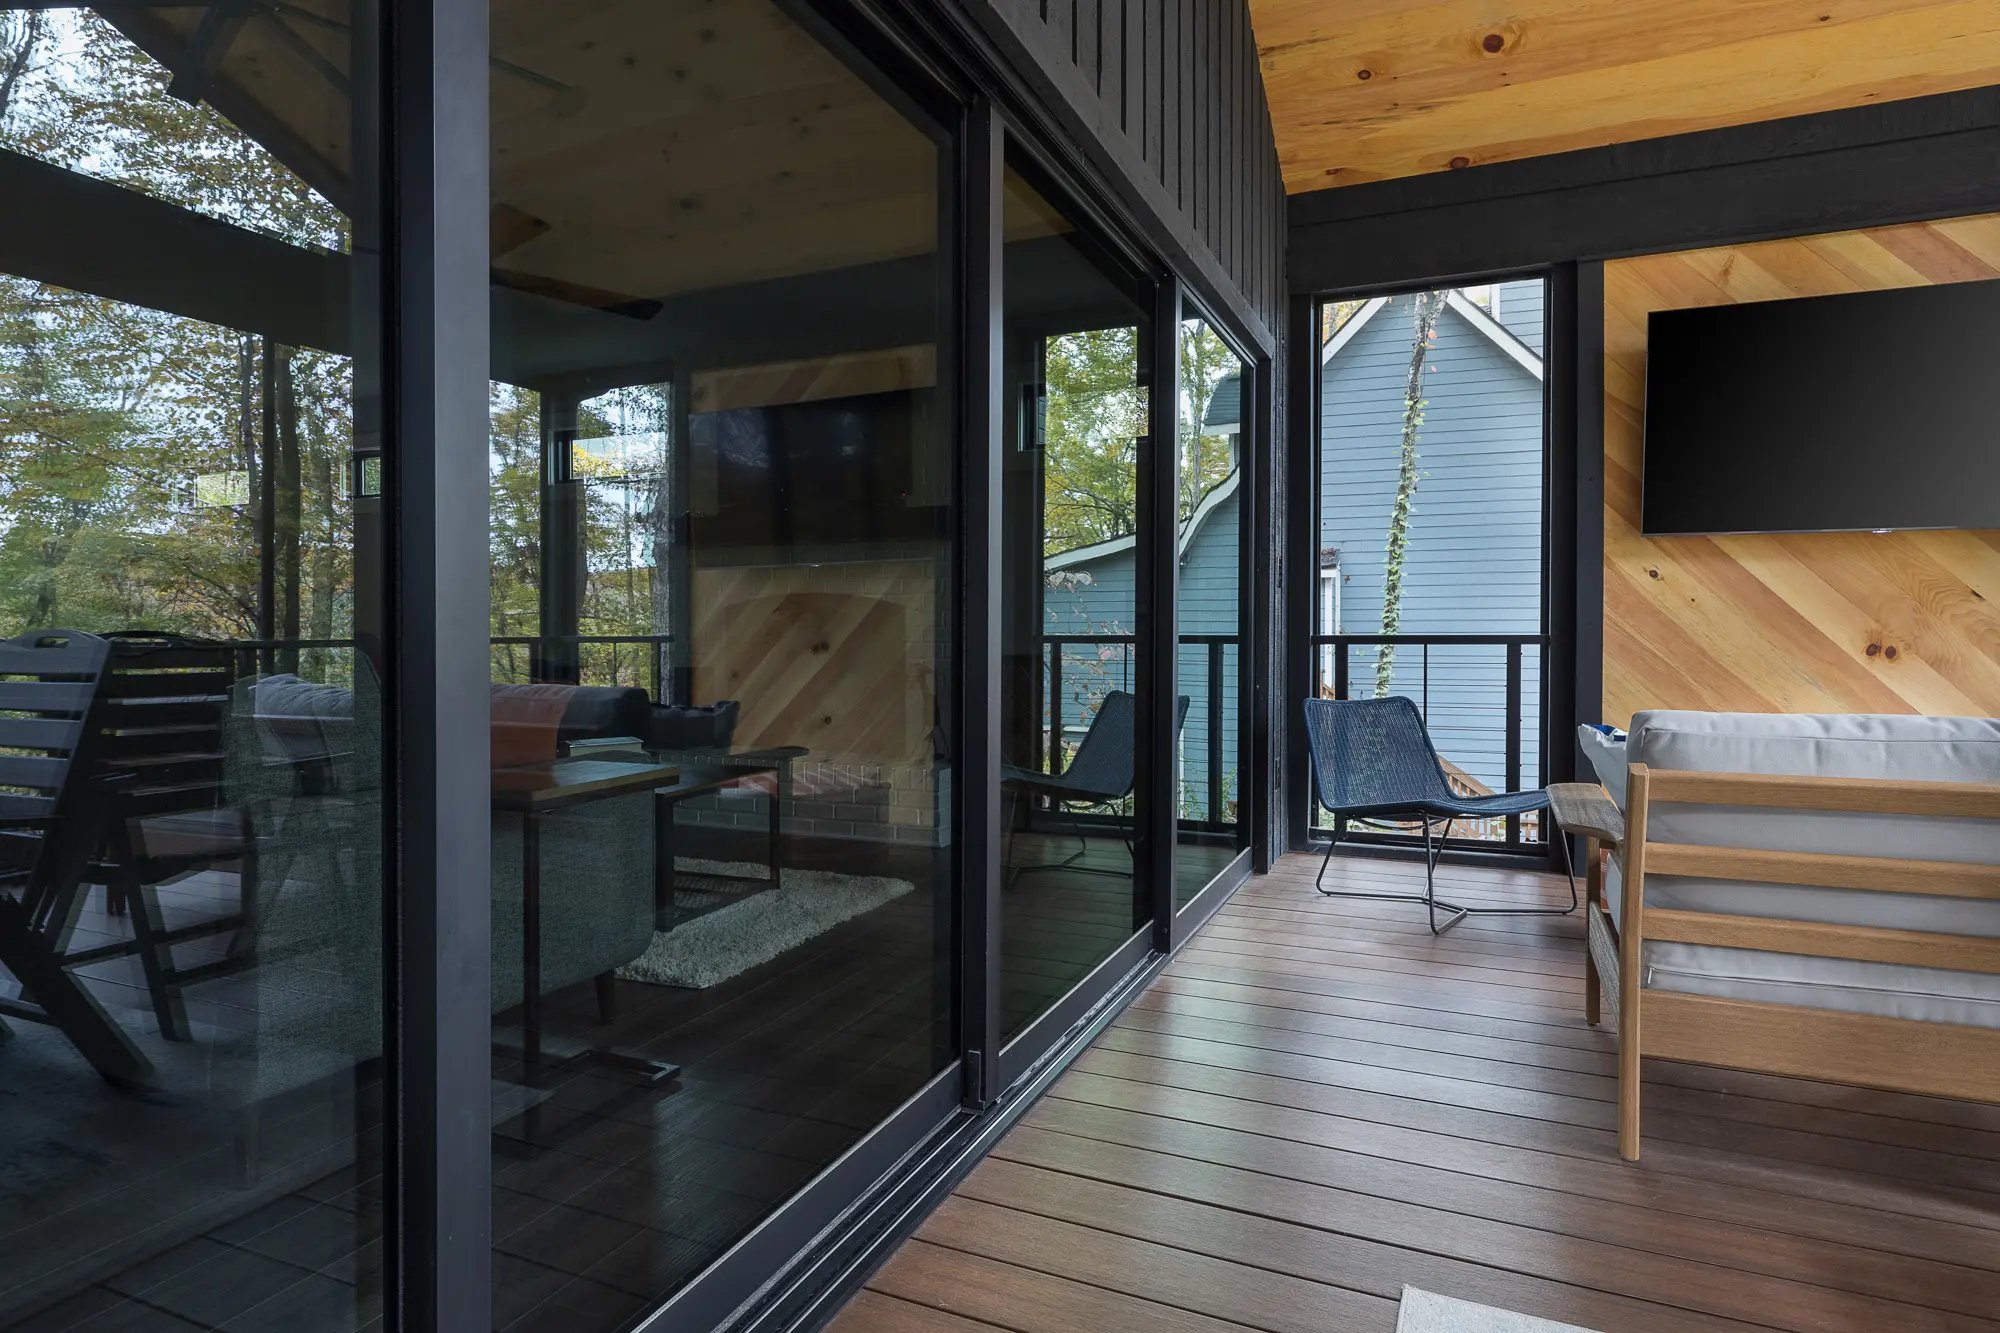 Modern screened porch with black trim, wooden elements, and comfortable outdoor furniture amidst nature.